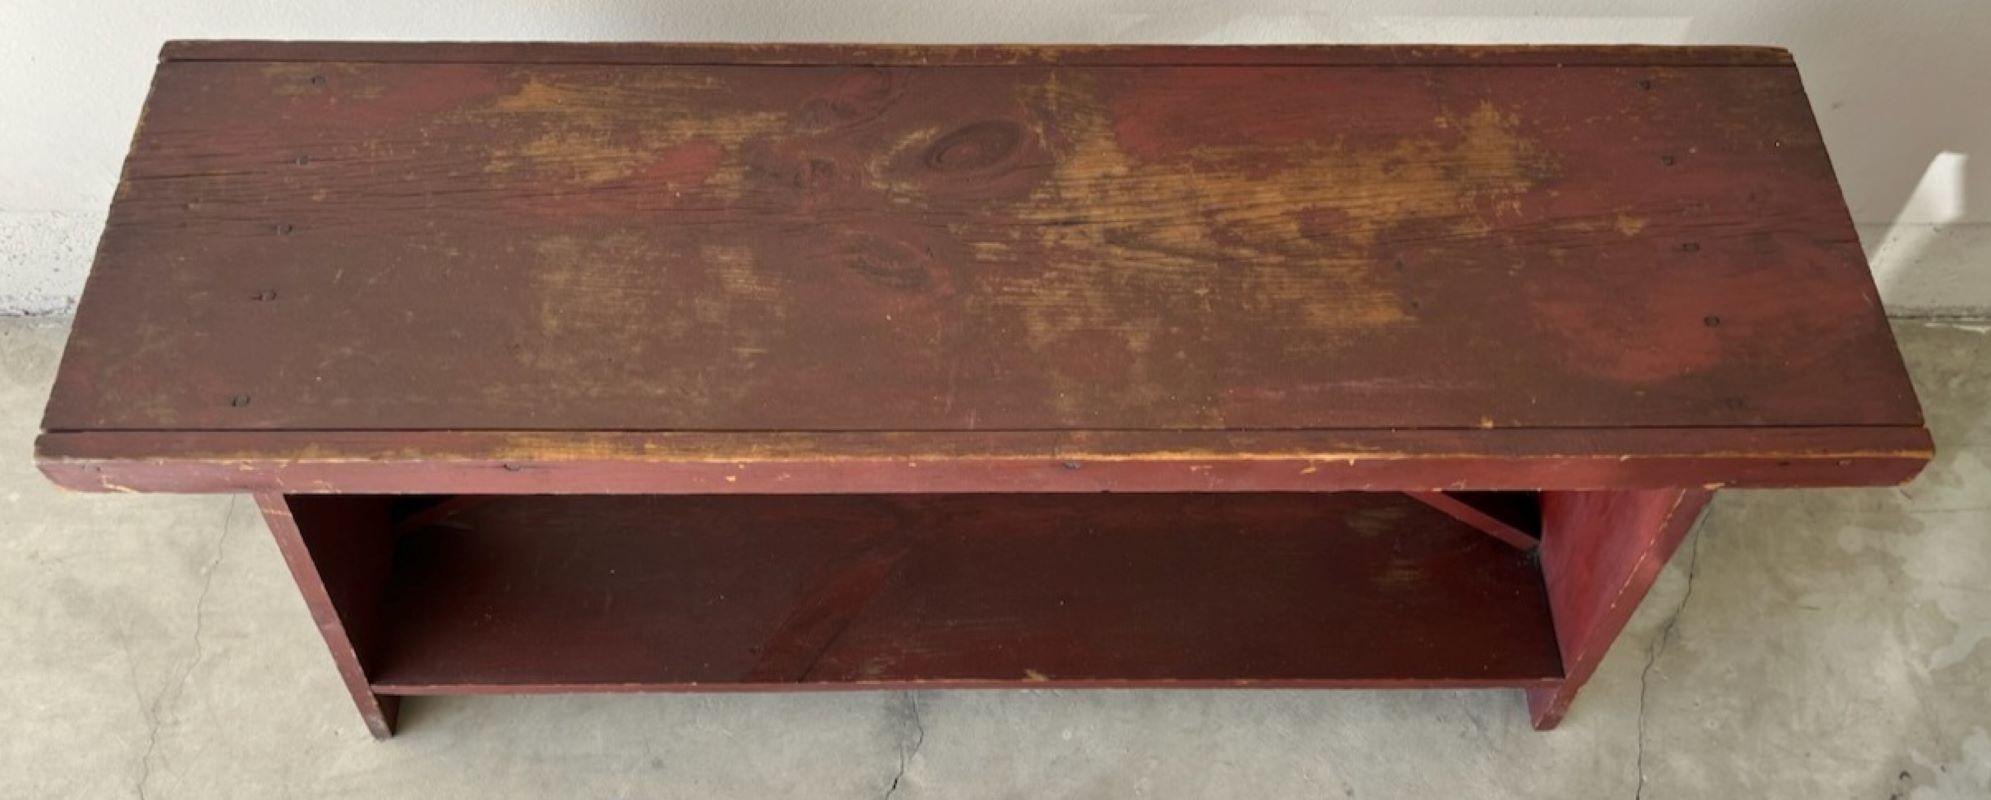  This 19thc original red painted farm bench is in fine ,sturdy condition.This bench came from Pennsylvania. 